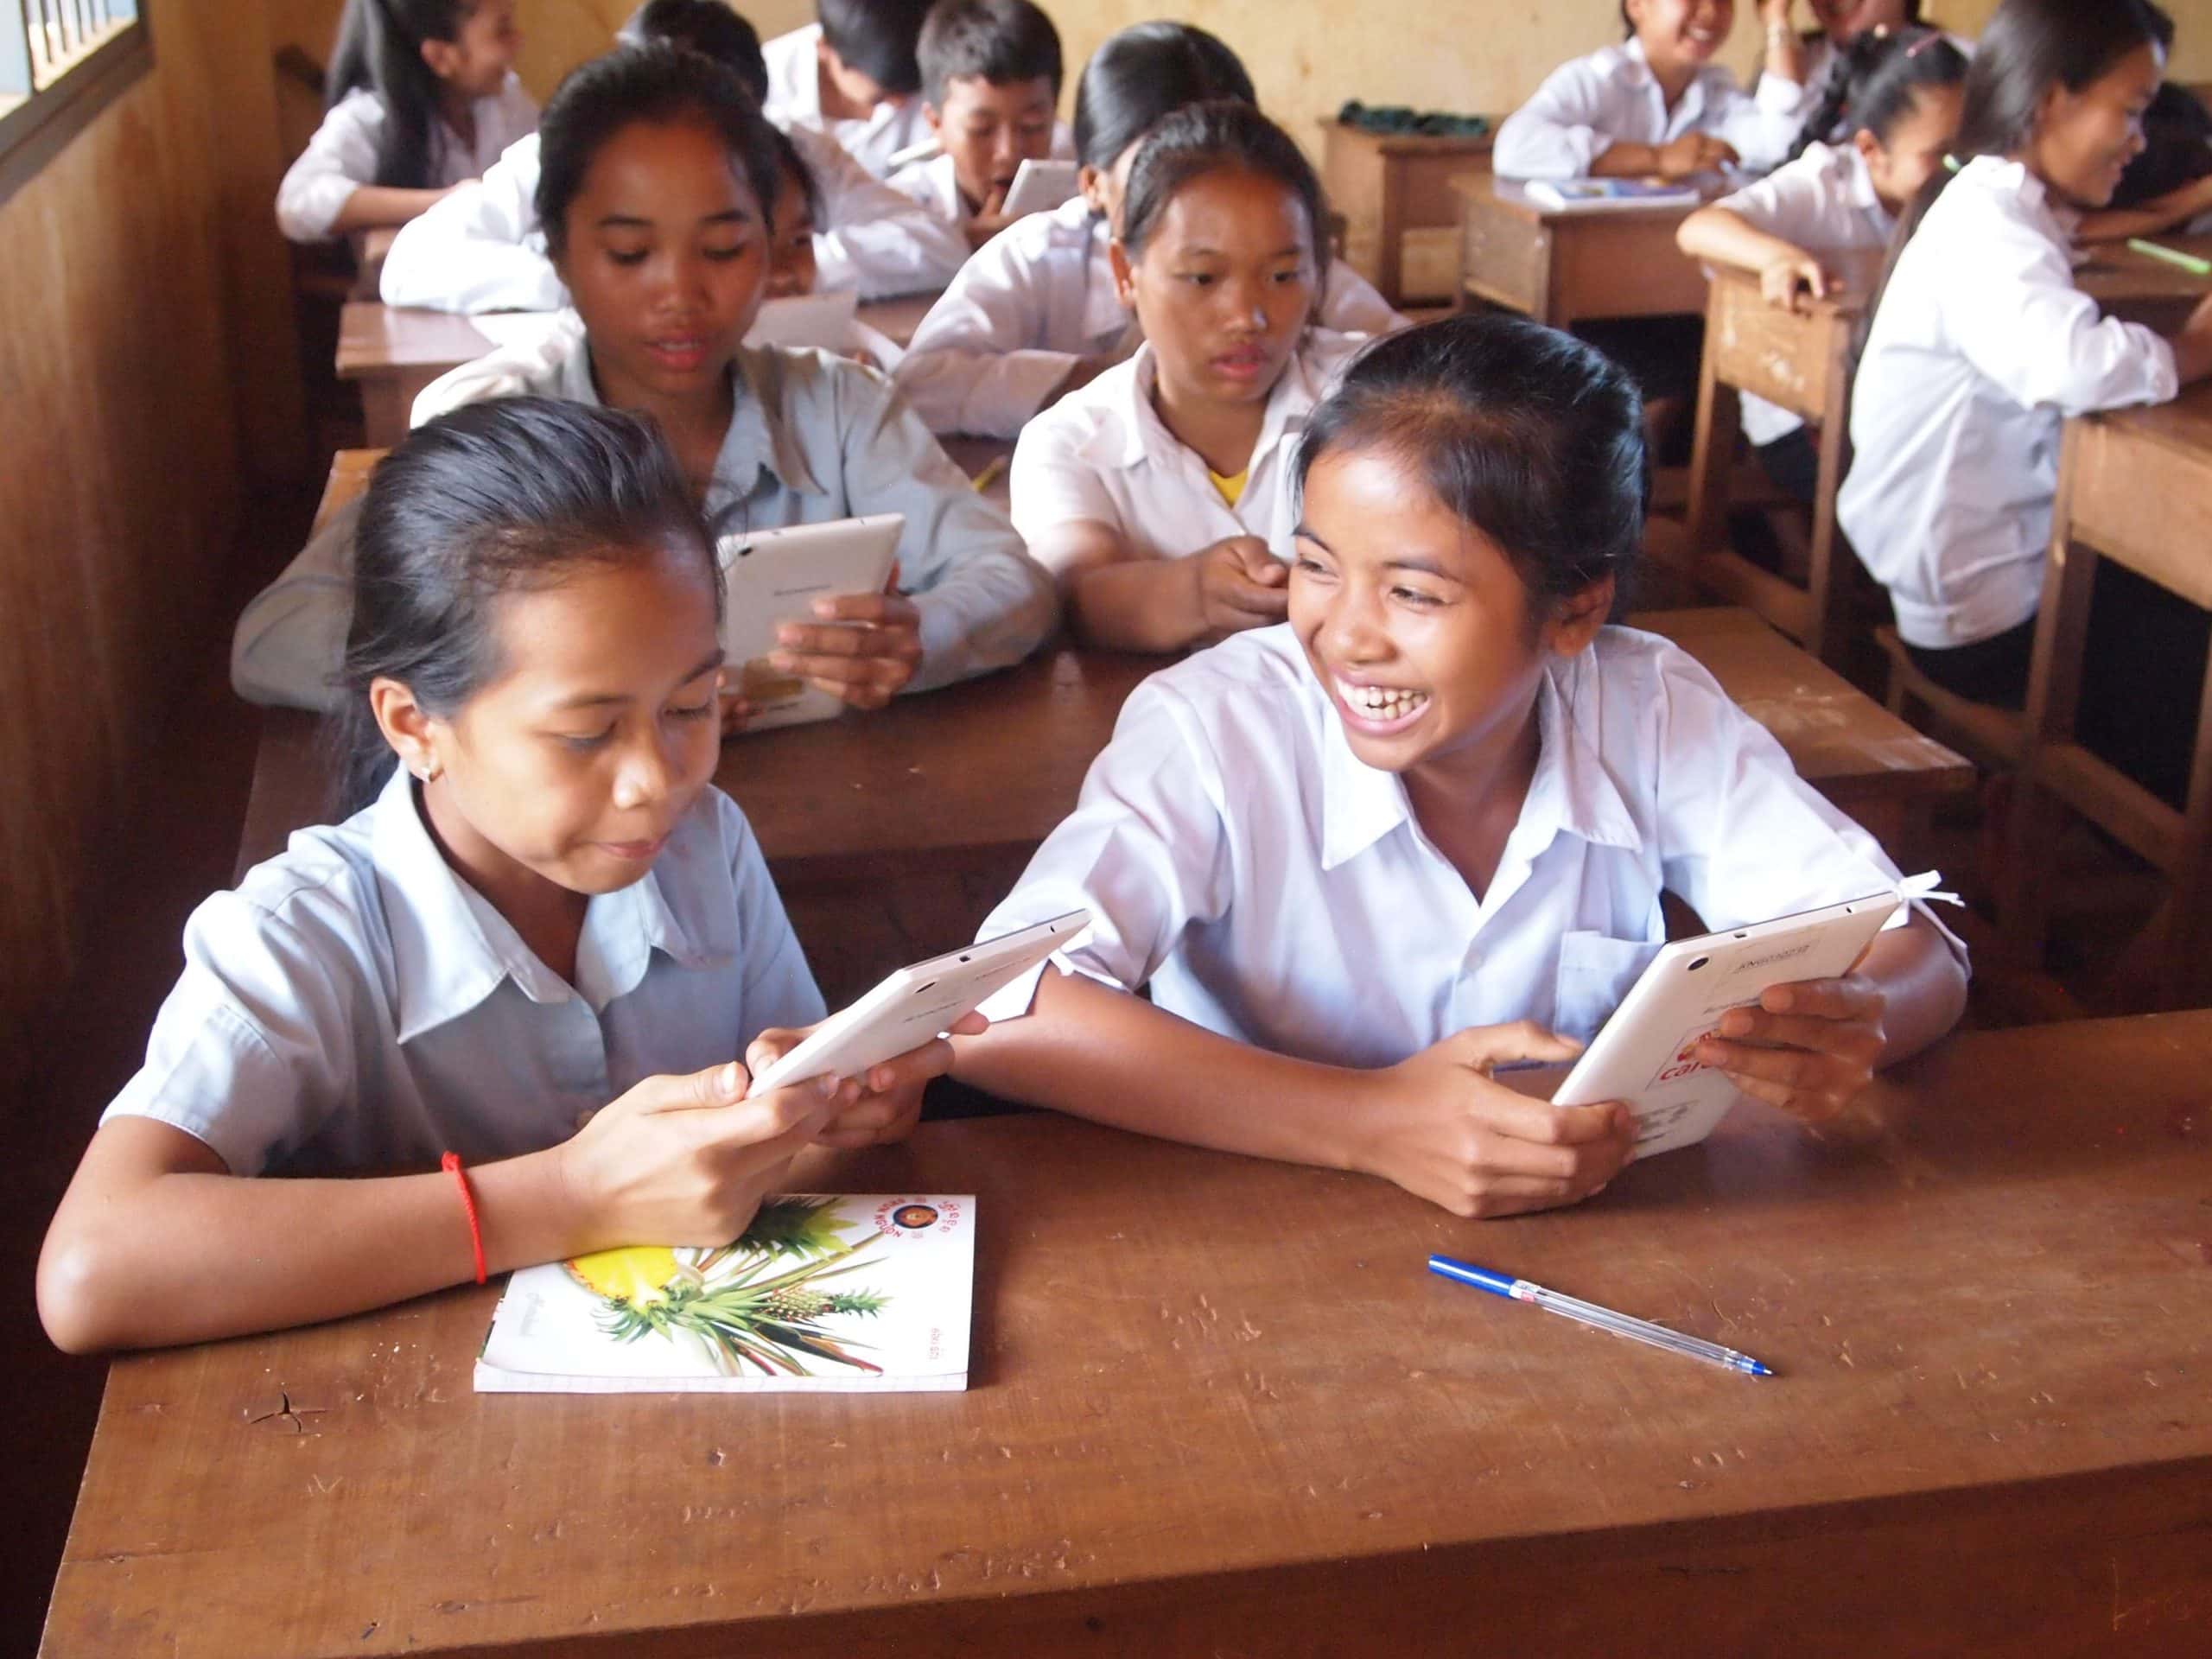 Developing a Digital Literacy Program and Solutions in Cambodia